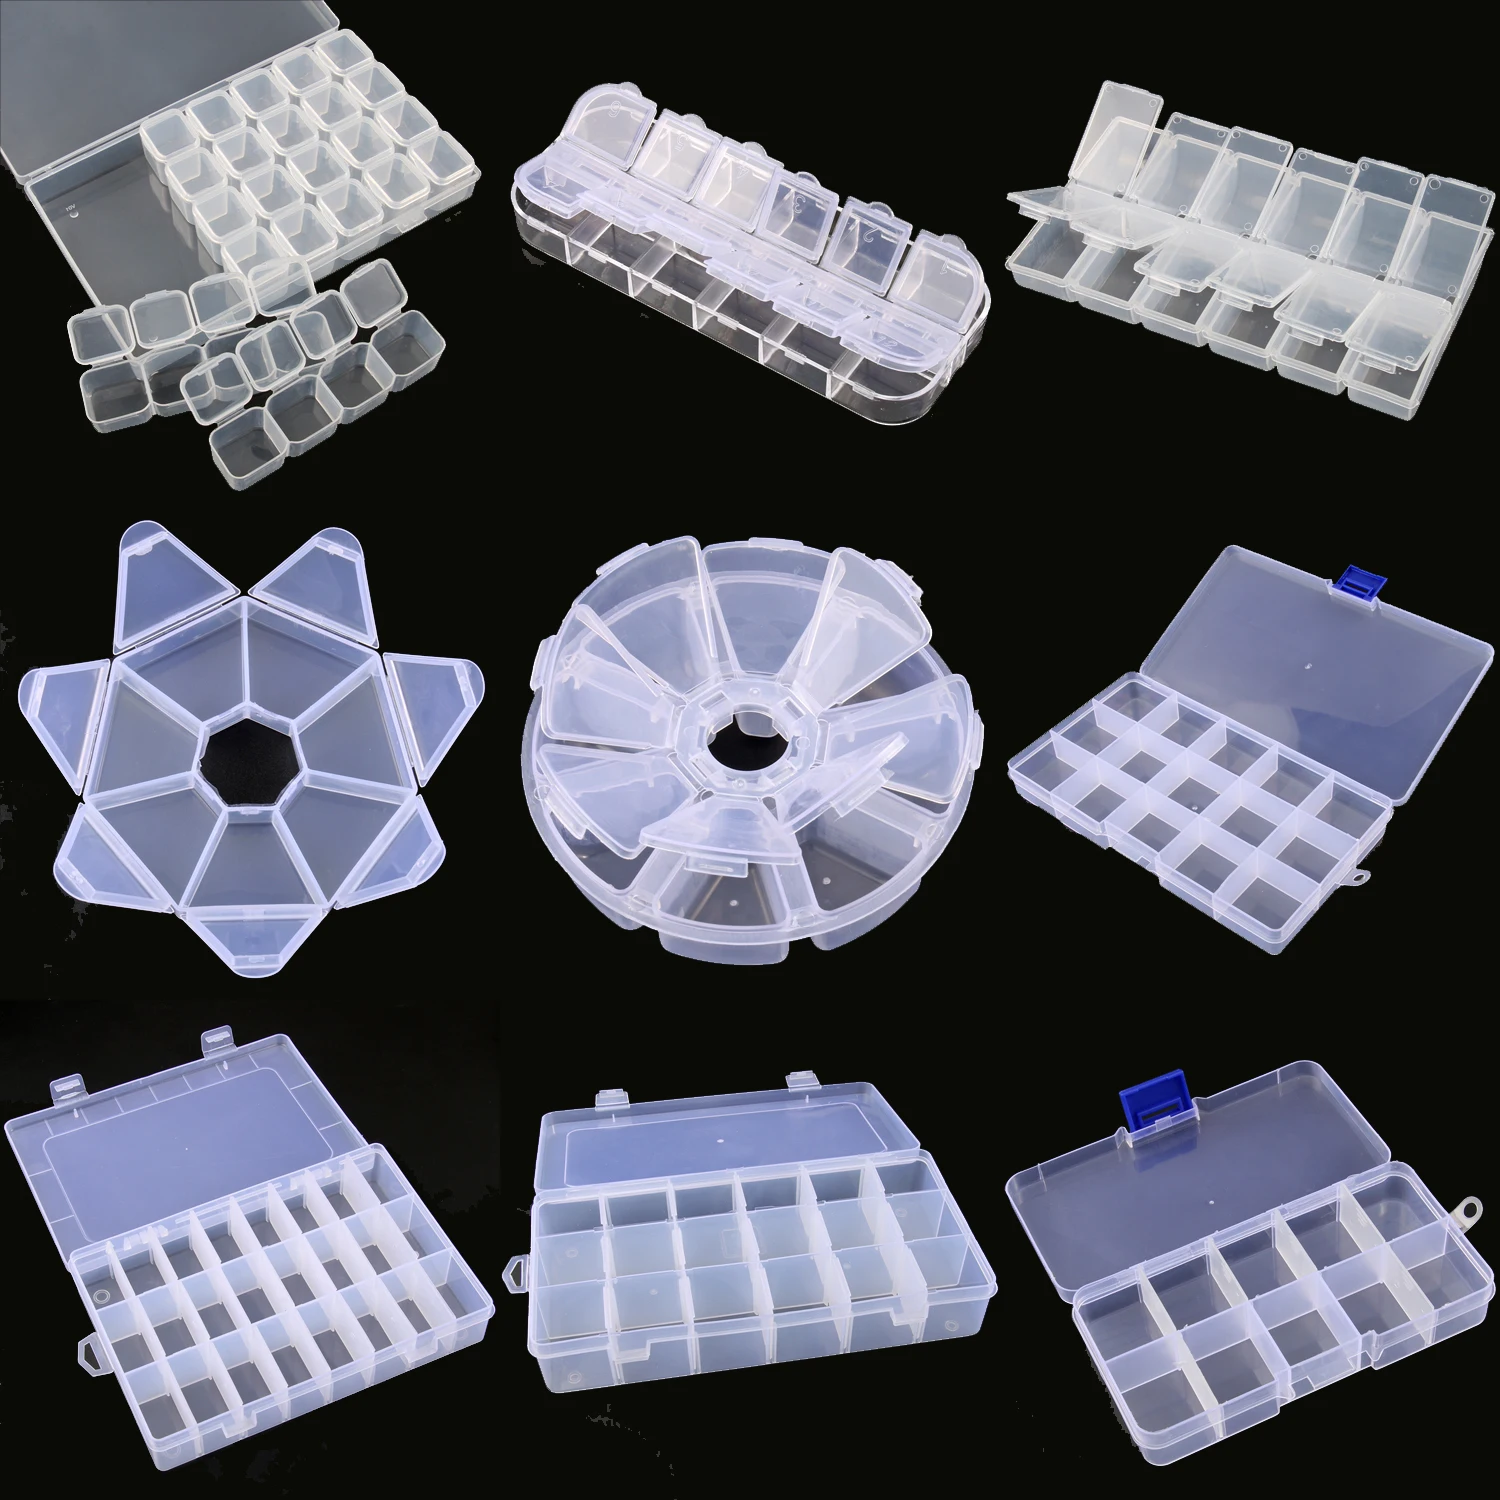 Transparent Plastic Jewelry Storage Boxes Compartment Adjustable Craft Organizer Jewelry Beads Earrings Display Rectangle Box 10 grids plastic jewelry box transparent storage box for beads earrings compartment adjustable case container jewelry organizer